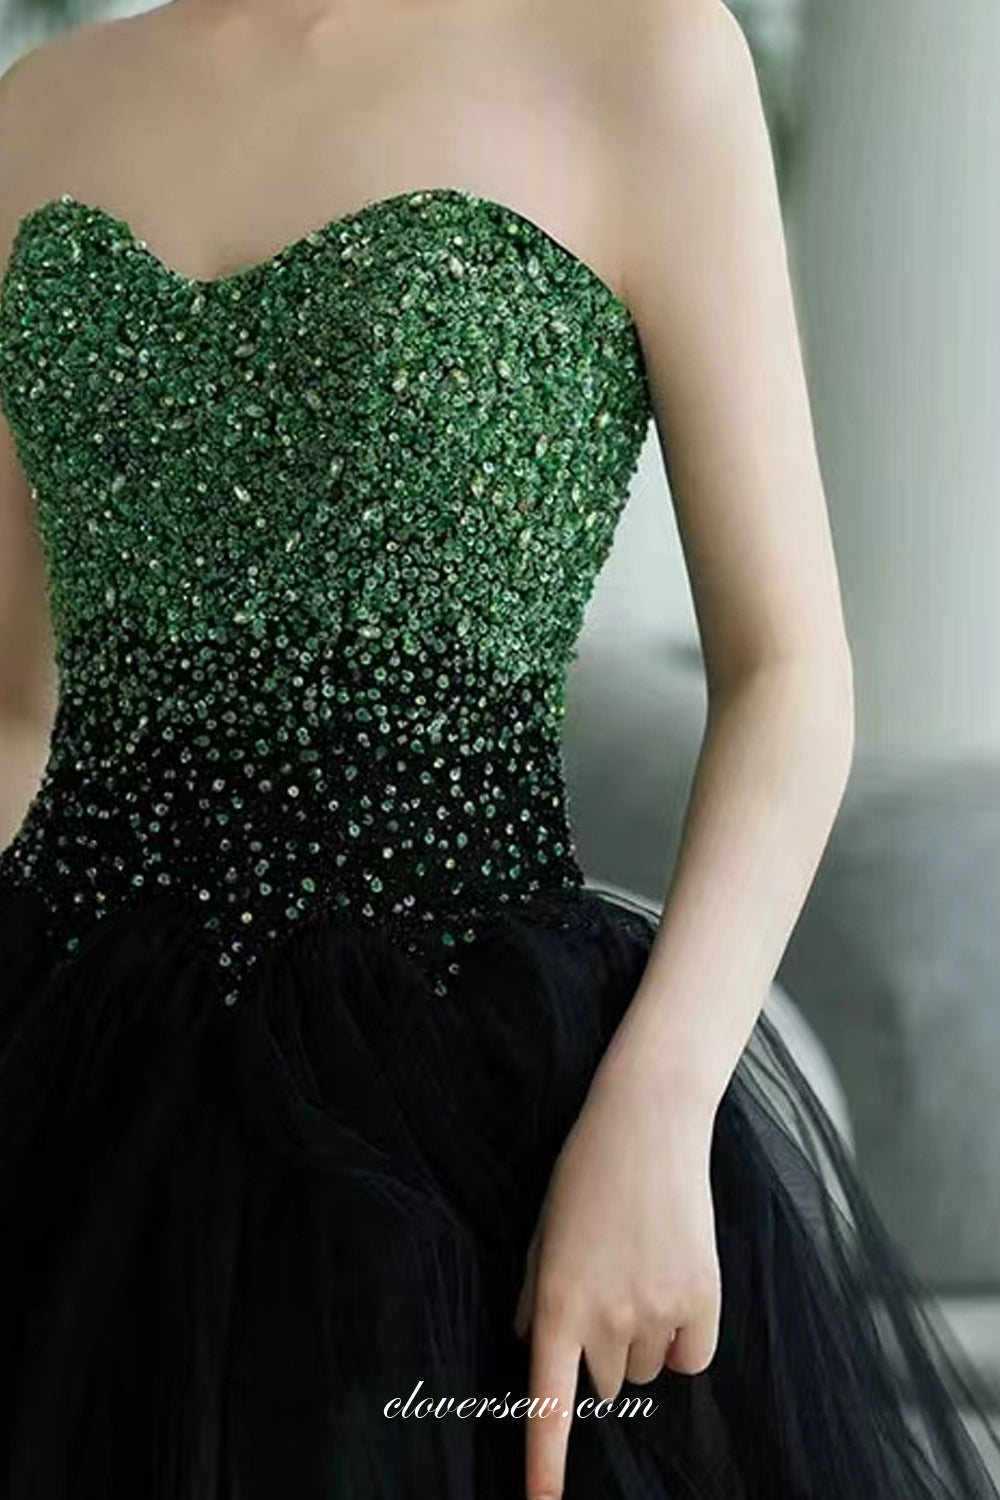 Black Tulle Green Beading Top Strapless Ball Gown Formal Prom Dresses, CP1073